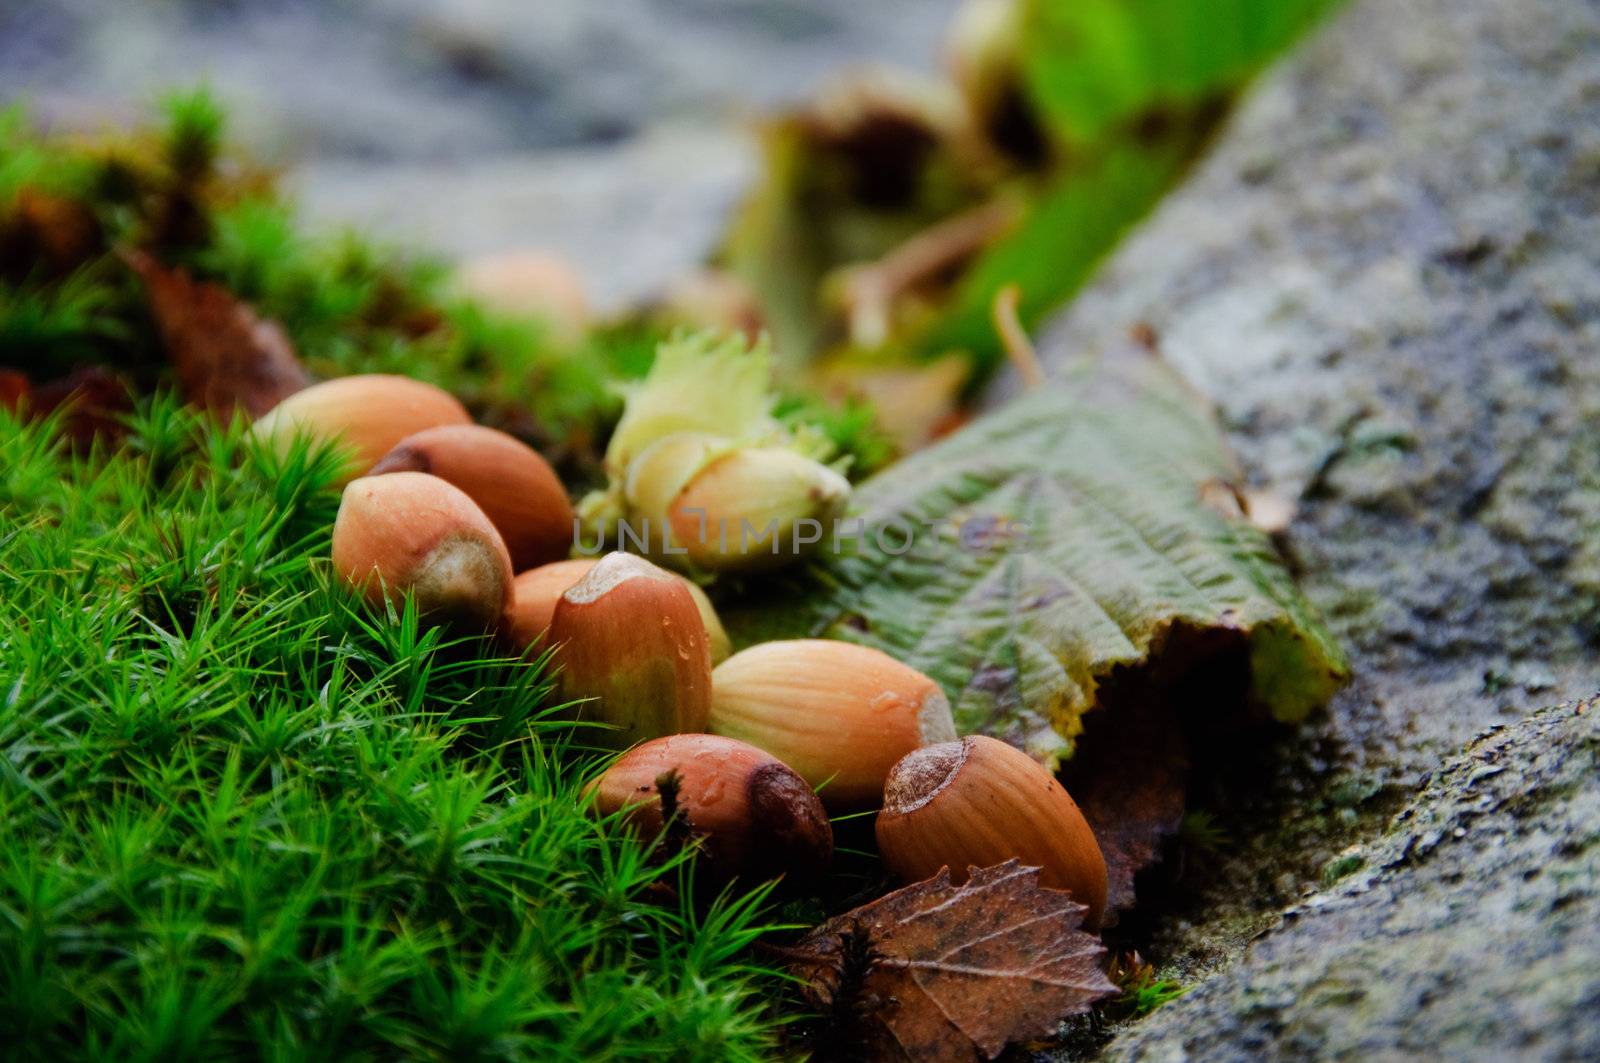 Some hazelnuts, located on a forest floor of moss